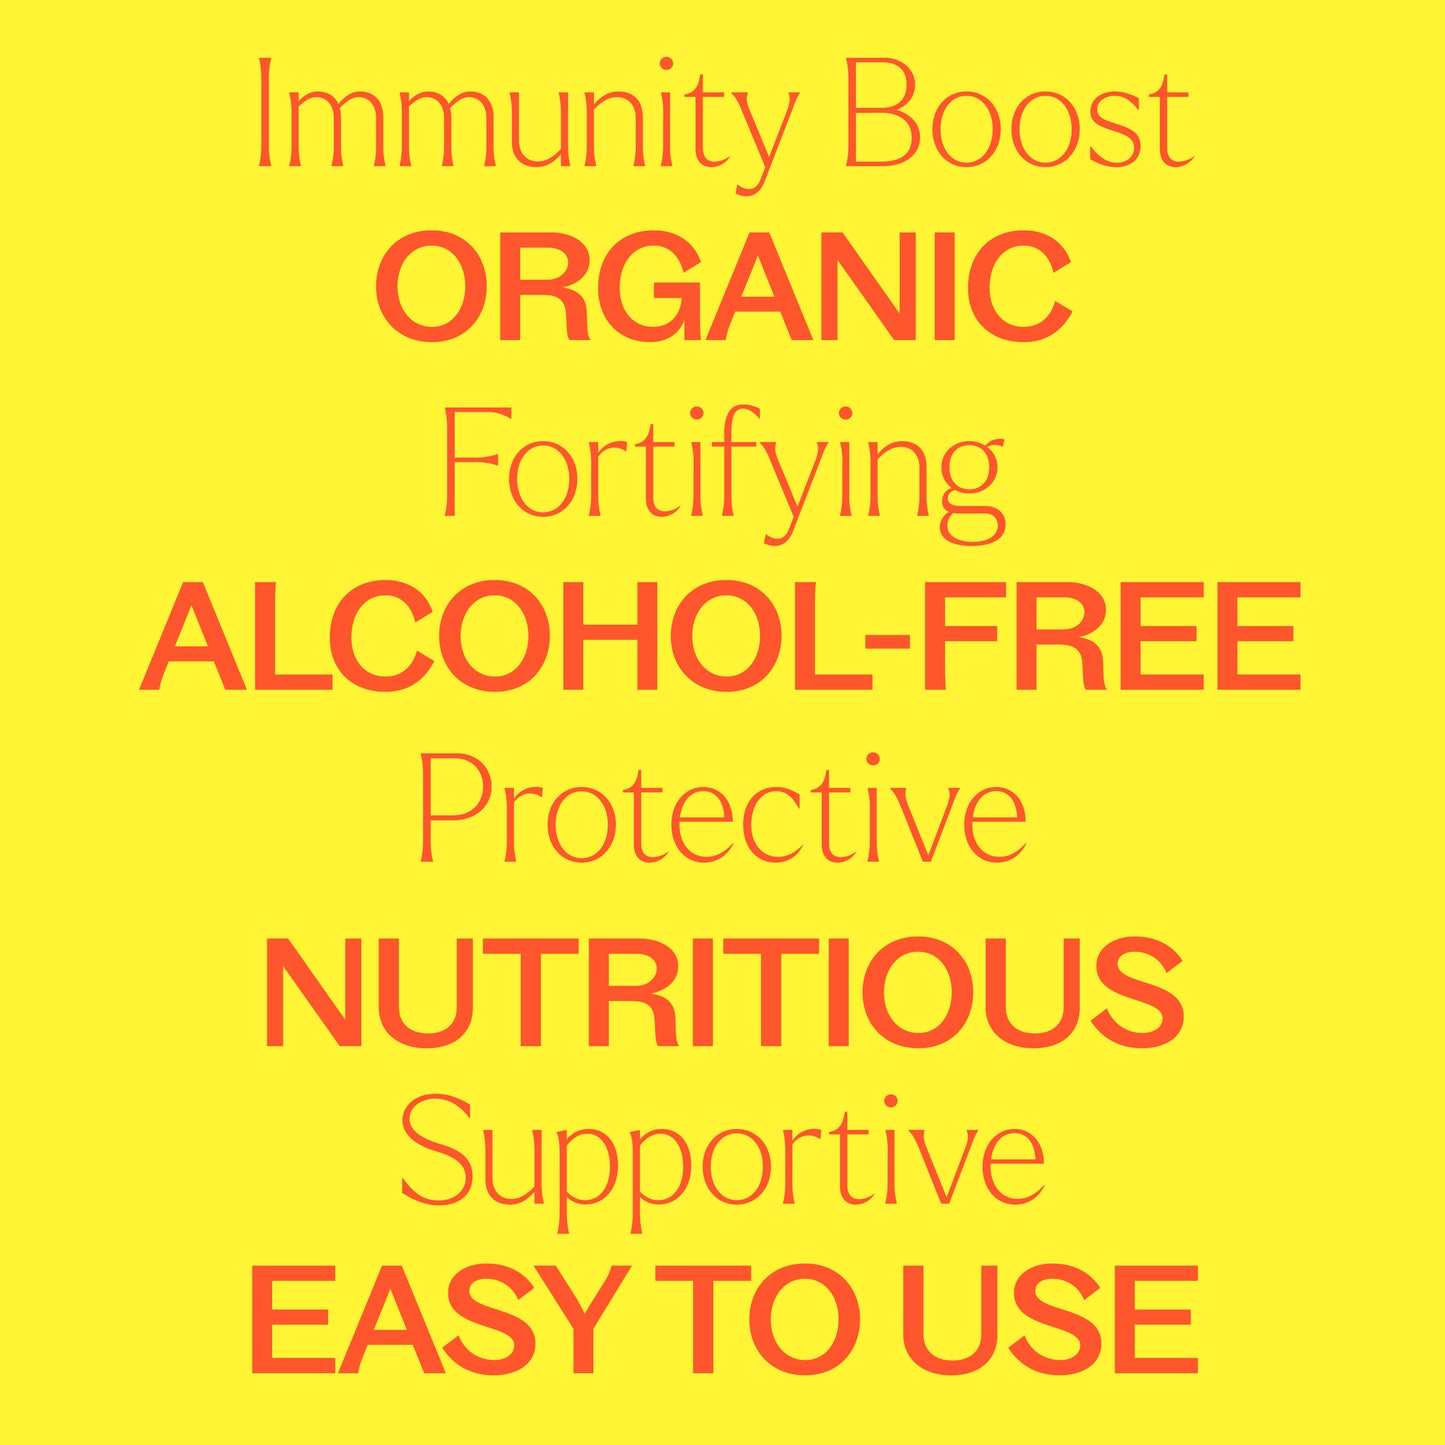 Immunity boost, fortifying, protective, supportive. Organic, alcohol-free, Nutritious, Easy 